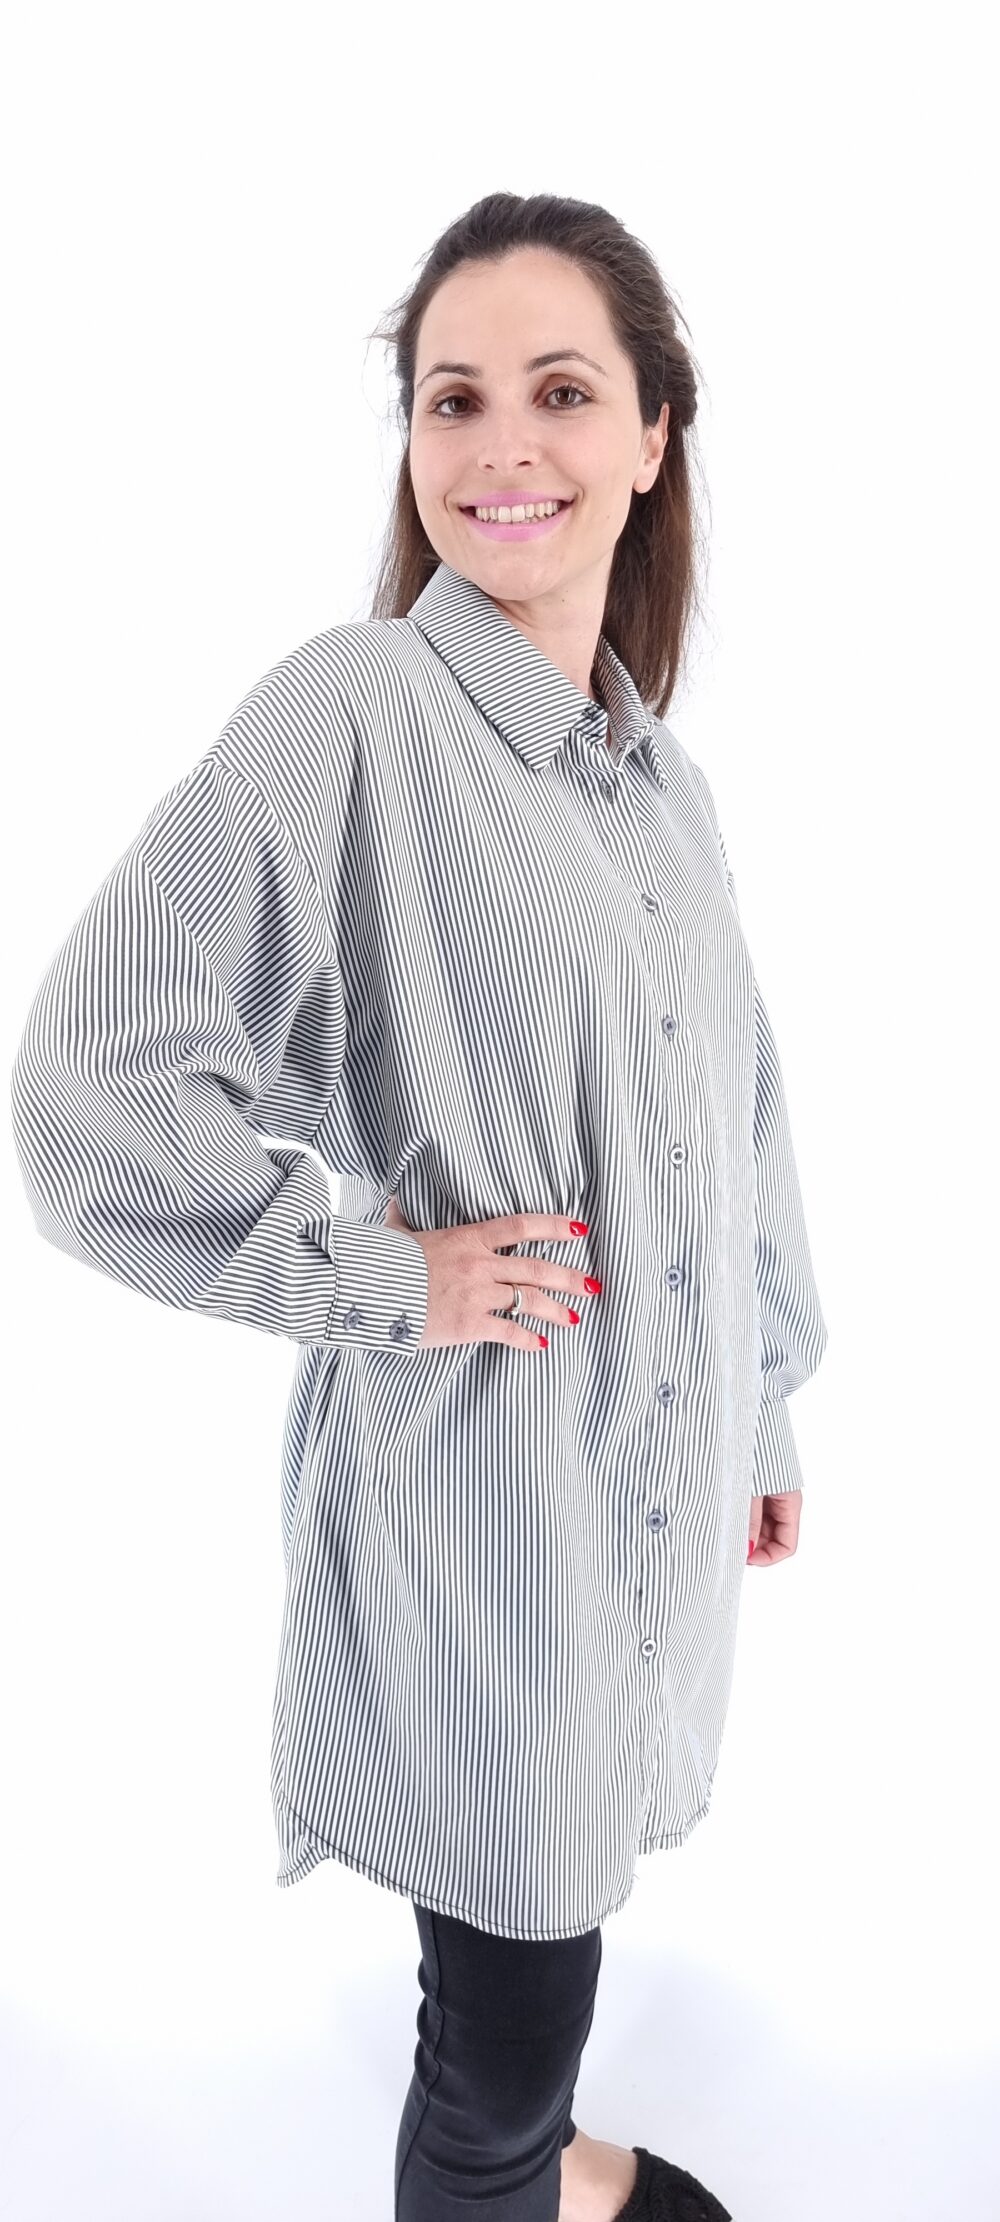 Long striped shirt with buttons black and white